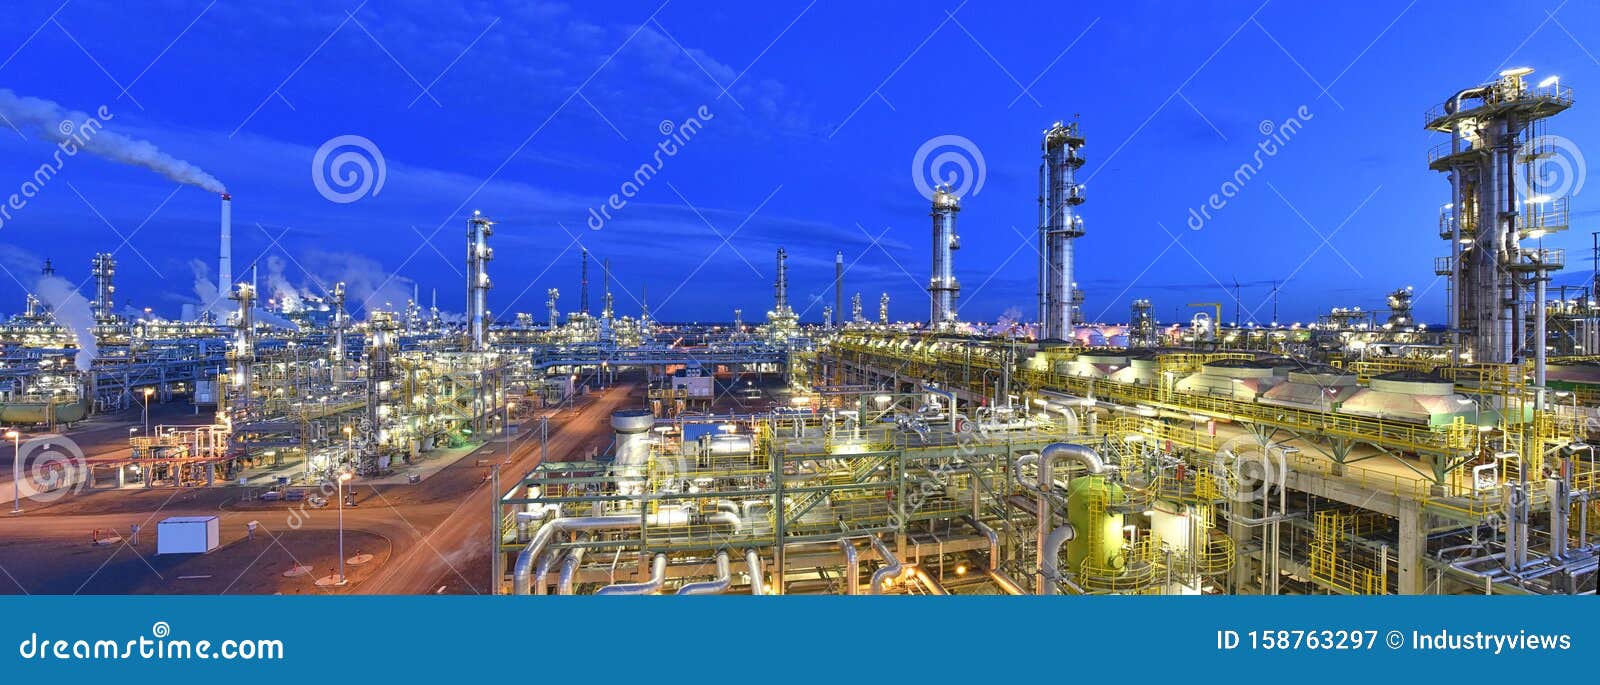 refinery - chemical factory at night with buildings, pipelines and lighting - industrial plant